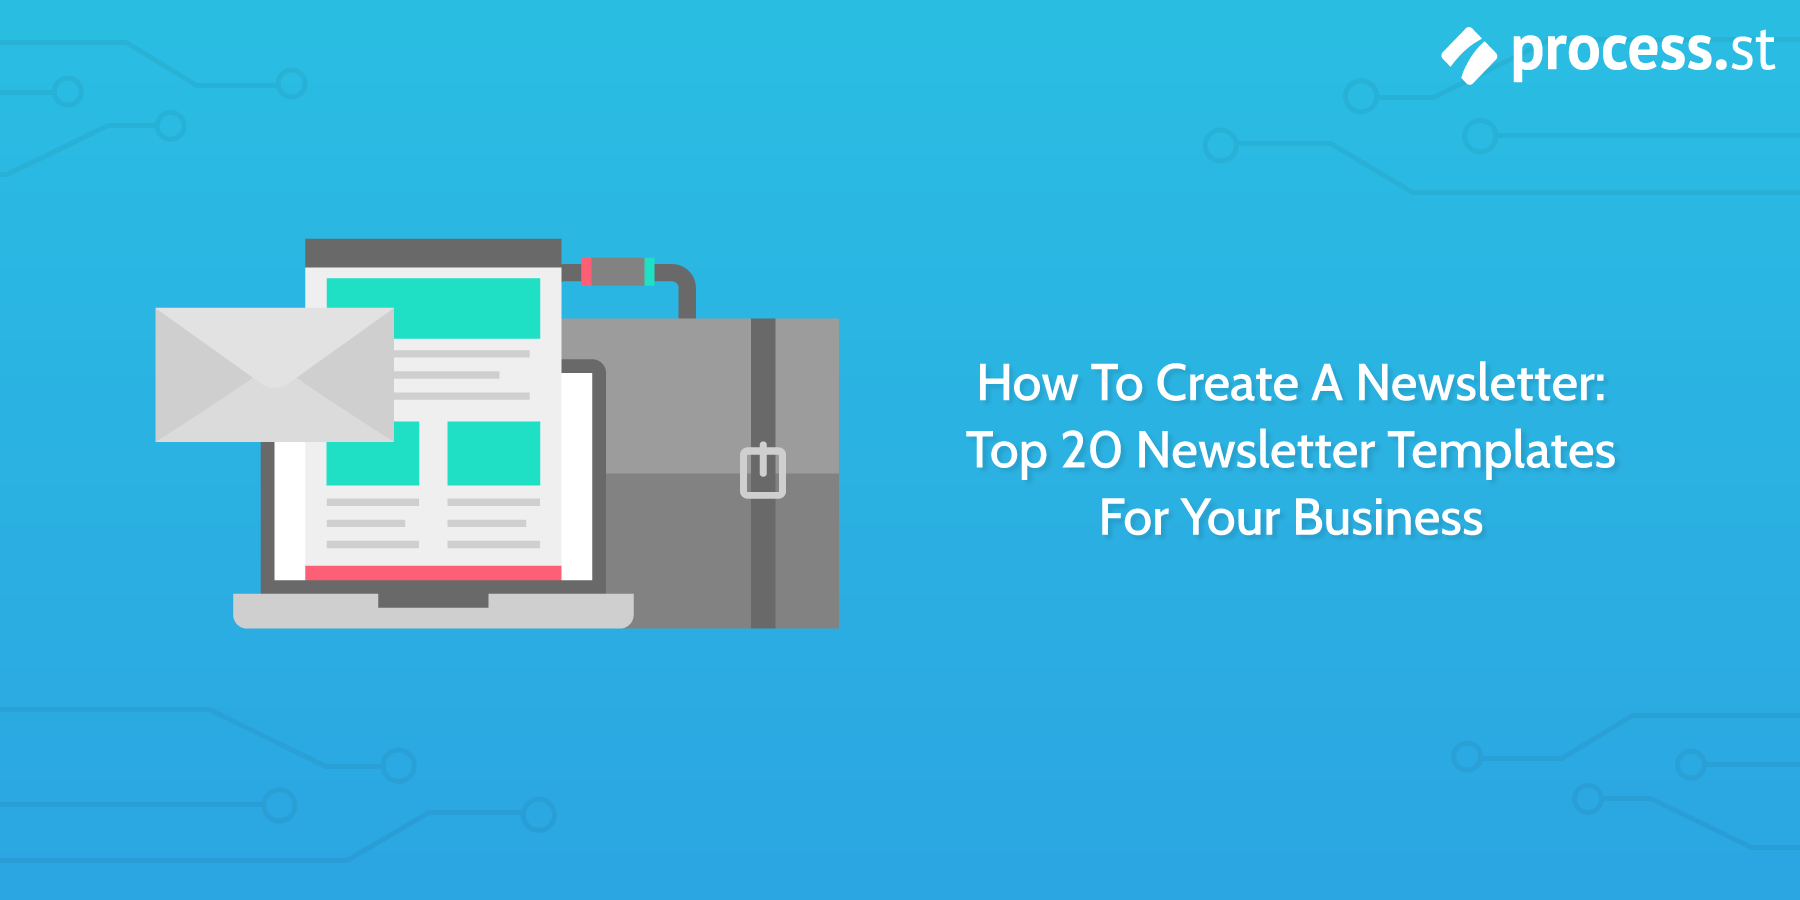 Newsletter templates: How to create a newsletter